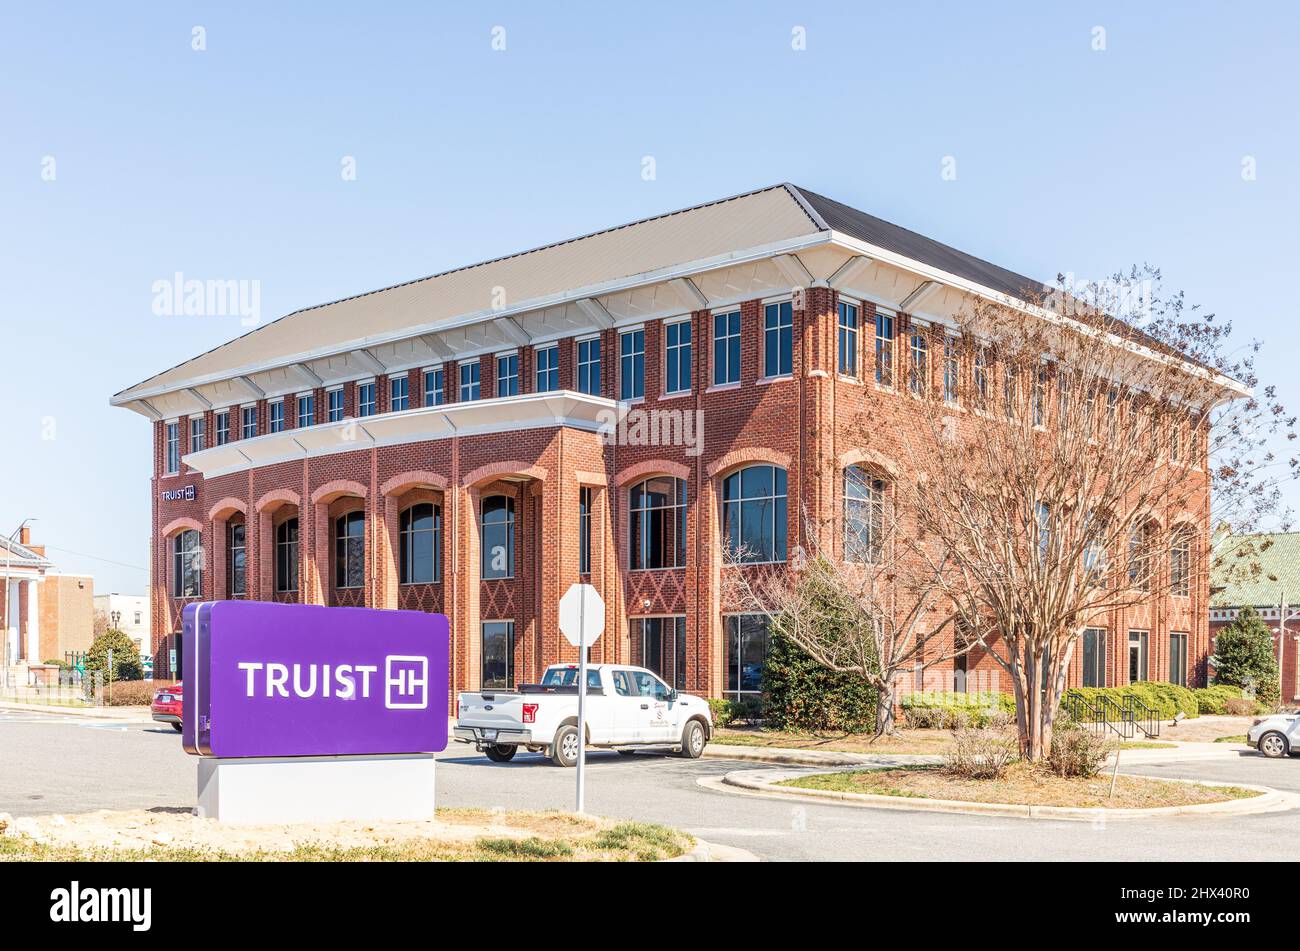 GASTONIA, NC, USA-3 MARCH 2022: Truist Bank building,front diagonal view showing building, monument sign, parking lot. Stock Photo